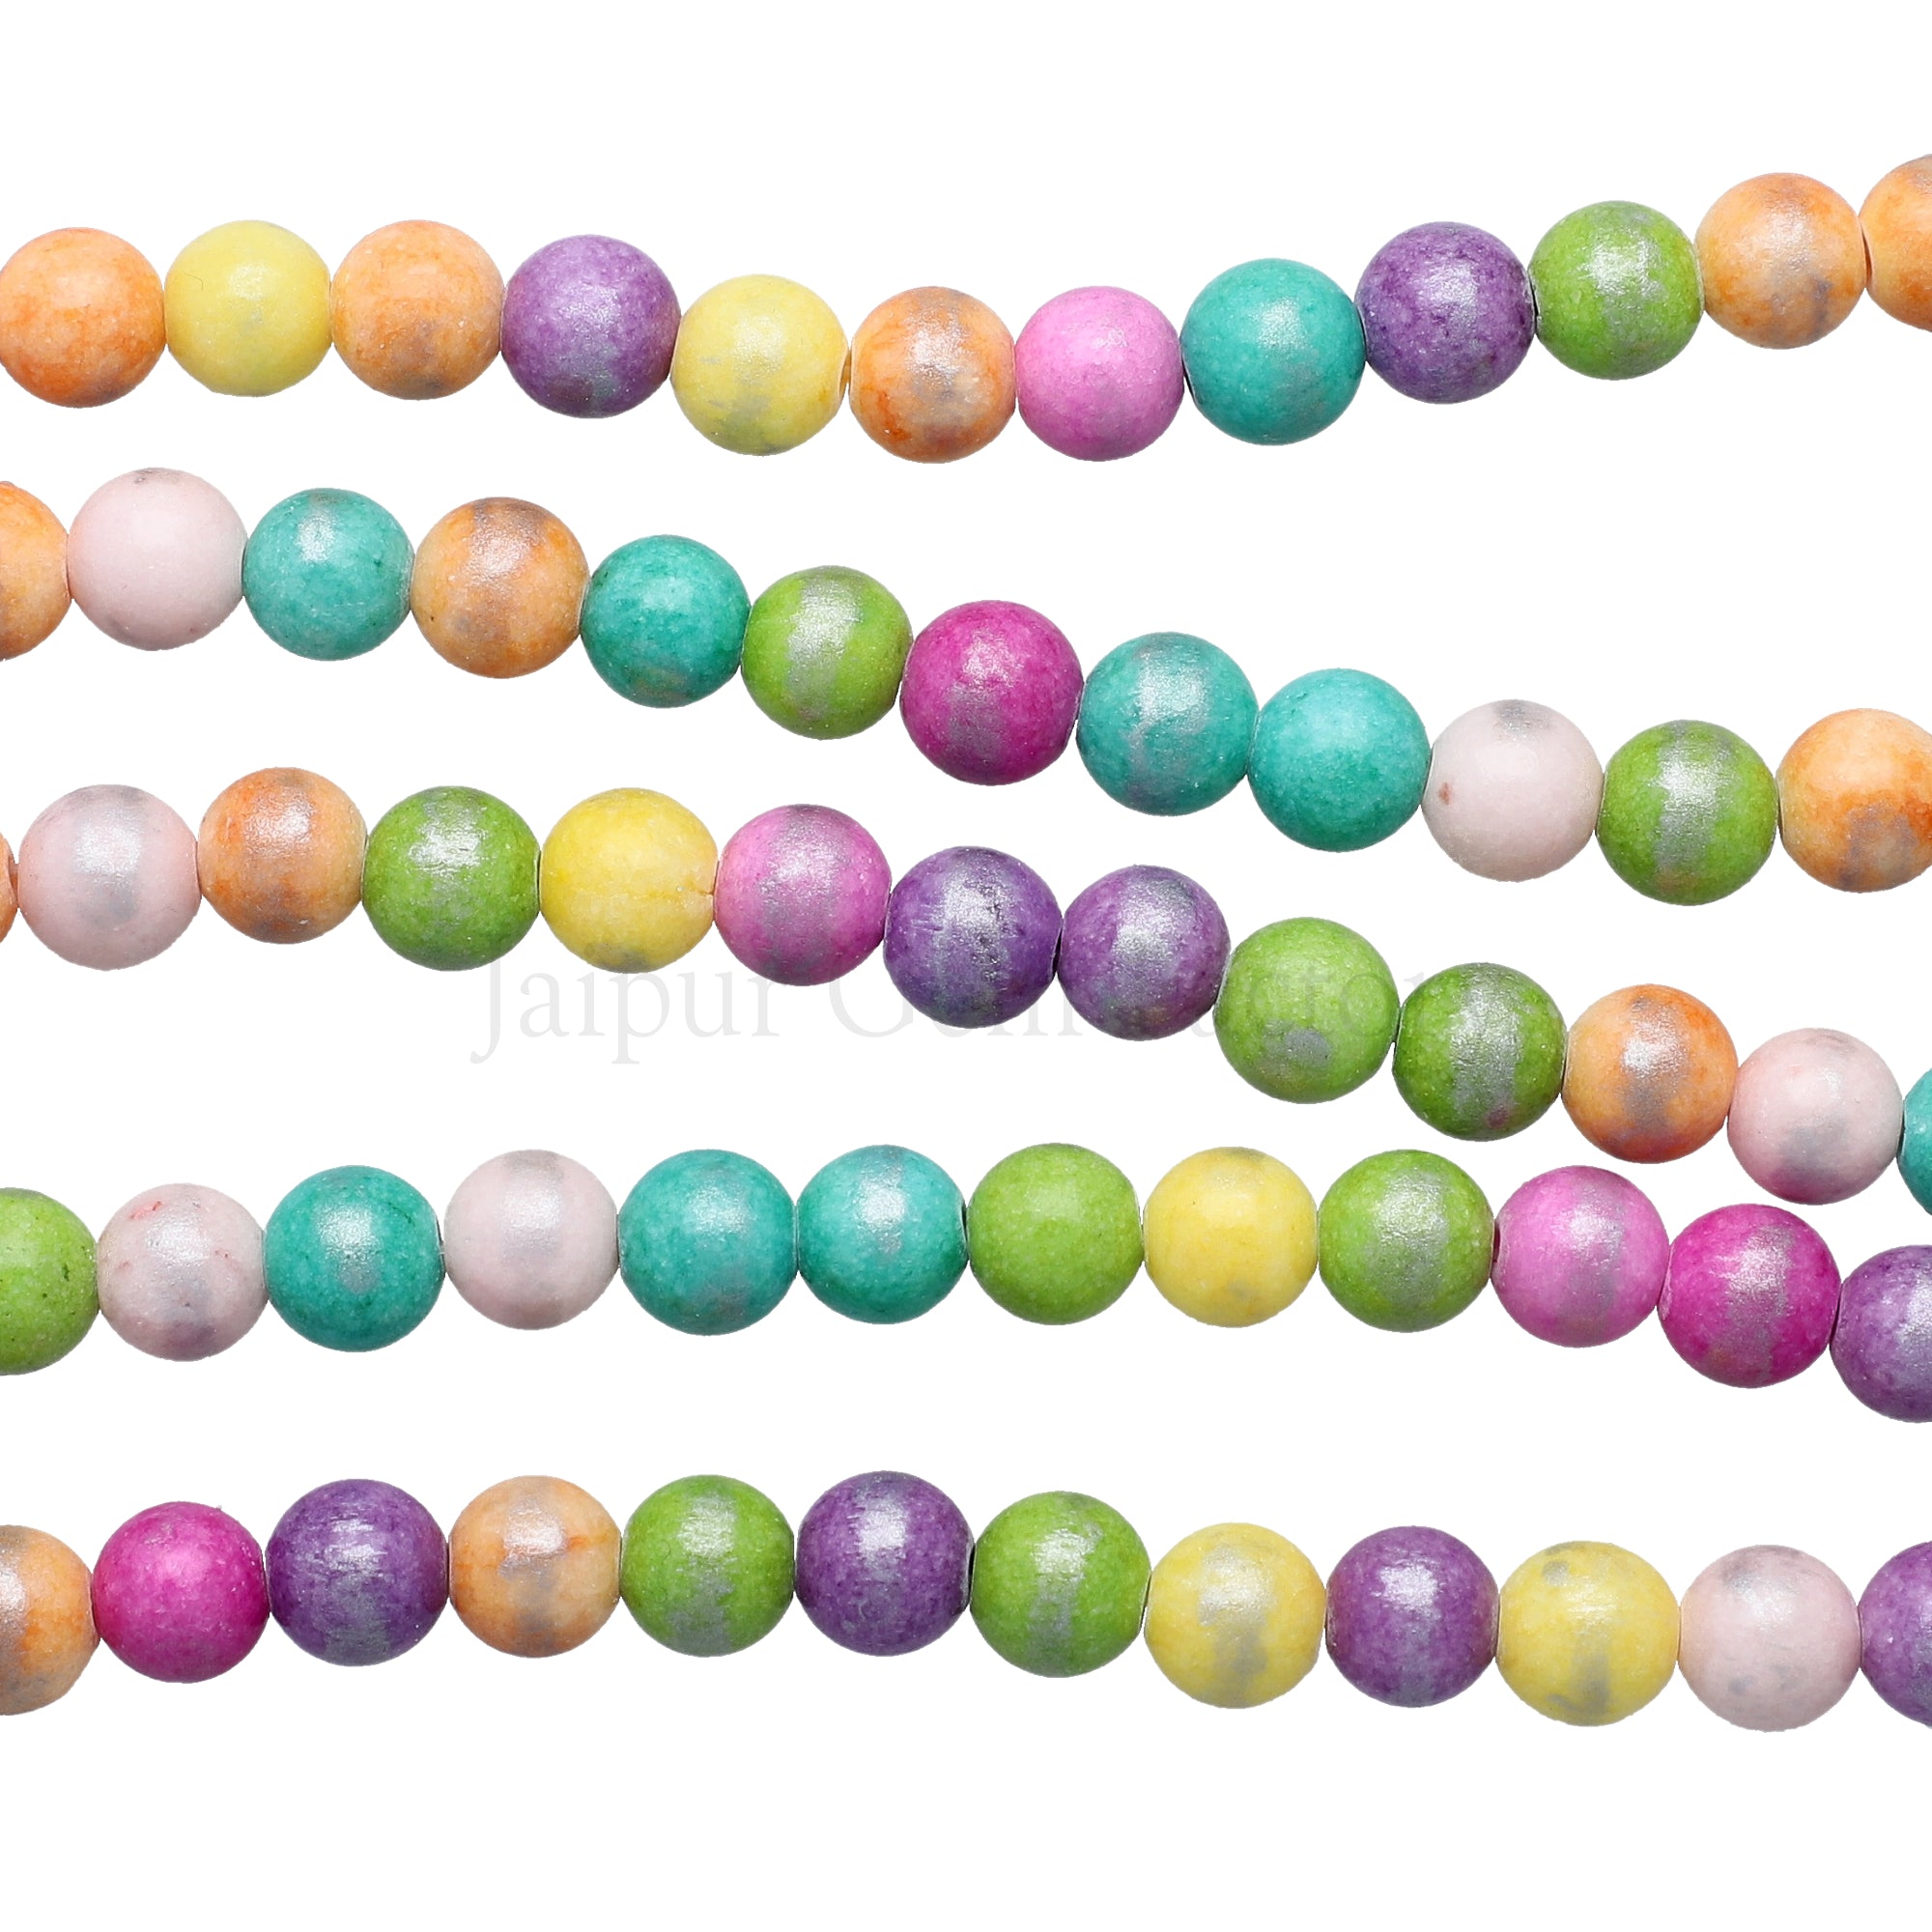 8 MM Multi Mix Color Silver Leafed Jade Smooth Round Beads 15 Inches Strand